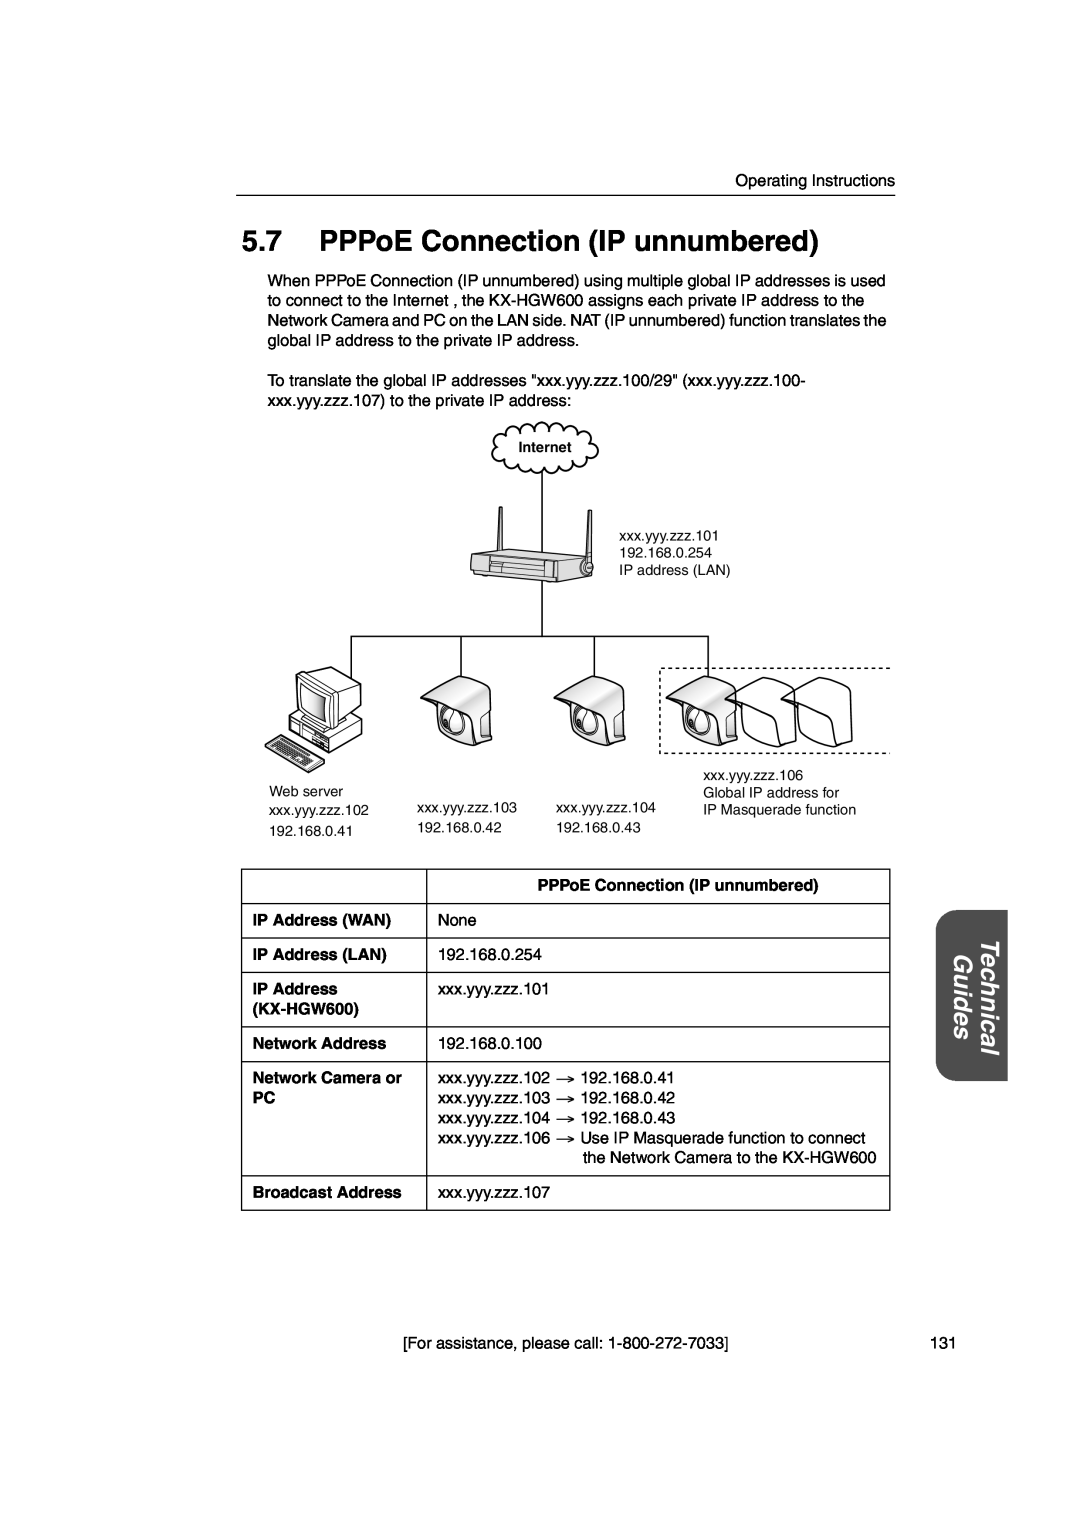 Panasonic KX-HGW600 manual PPPoE Connection IP unnumbered, Guides, Technical 